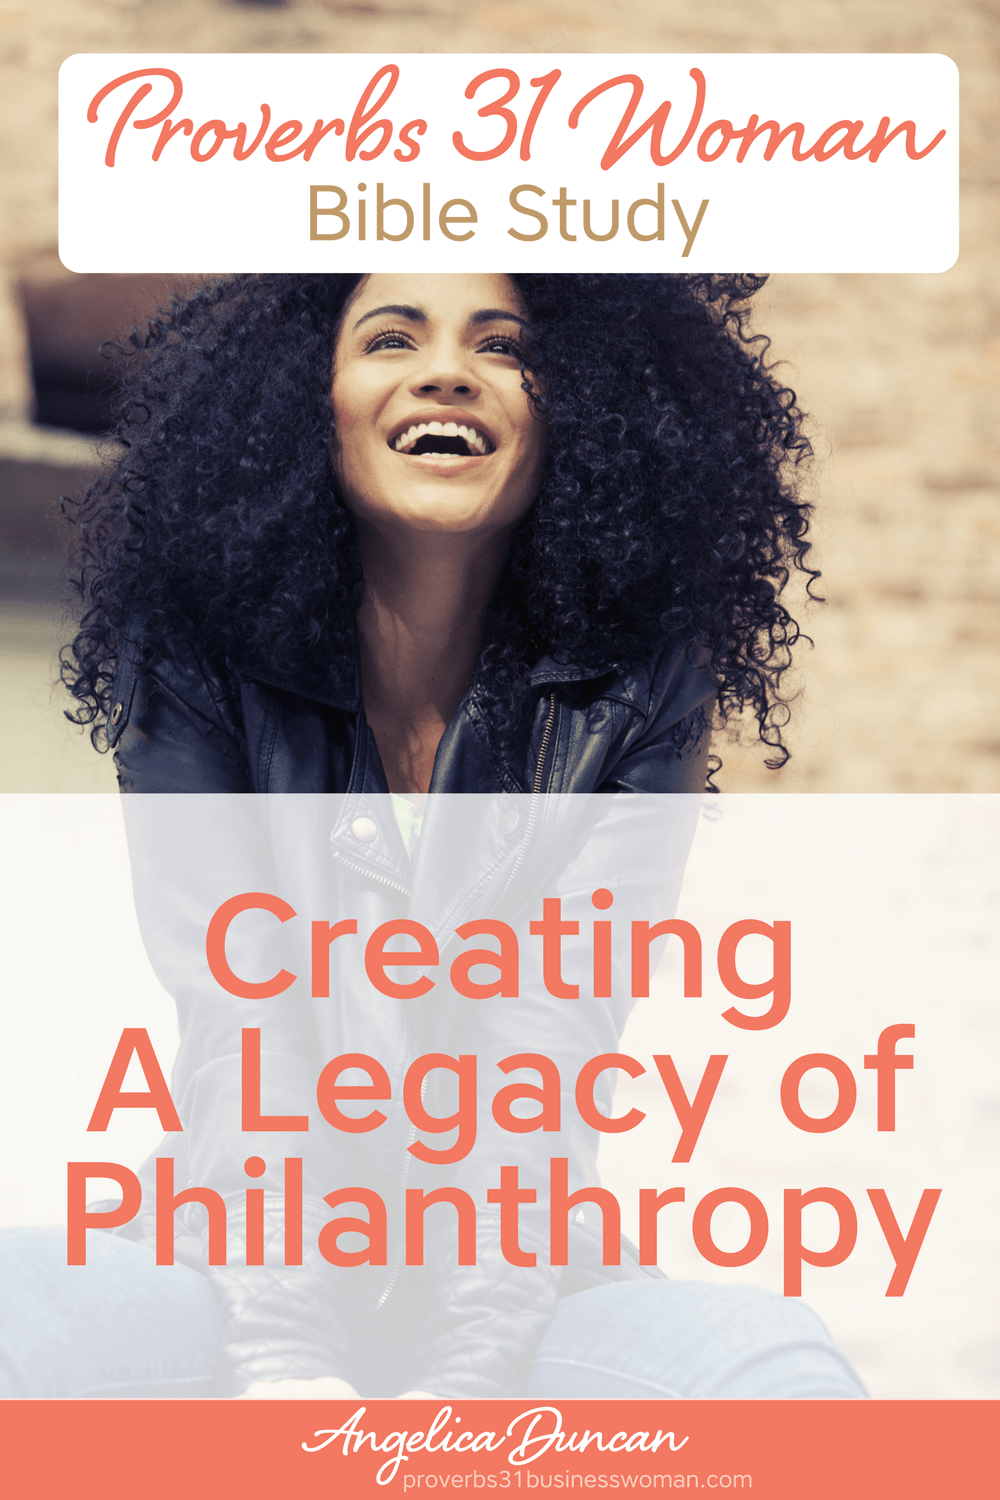 Have you ever considered what creating a Legacy of Philanthropy might look like for you & your family? Let's find out in our Proverbs 31 Woman Bible Study!